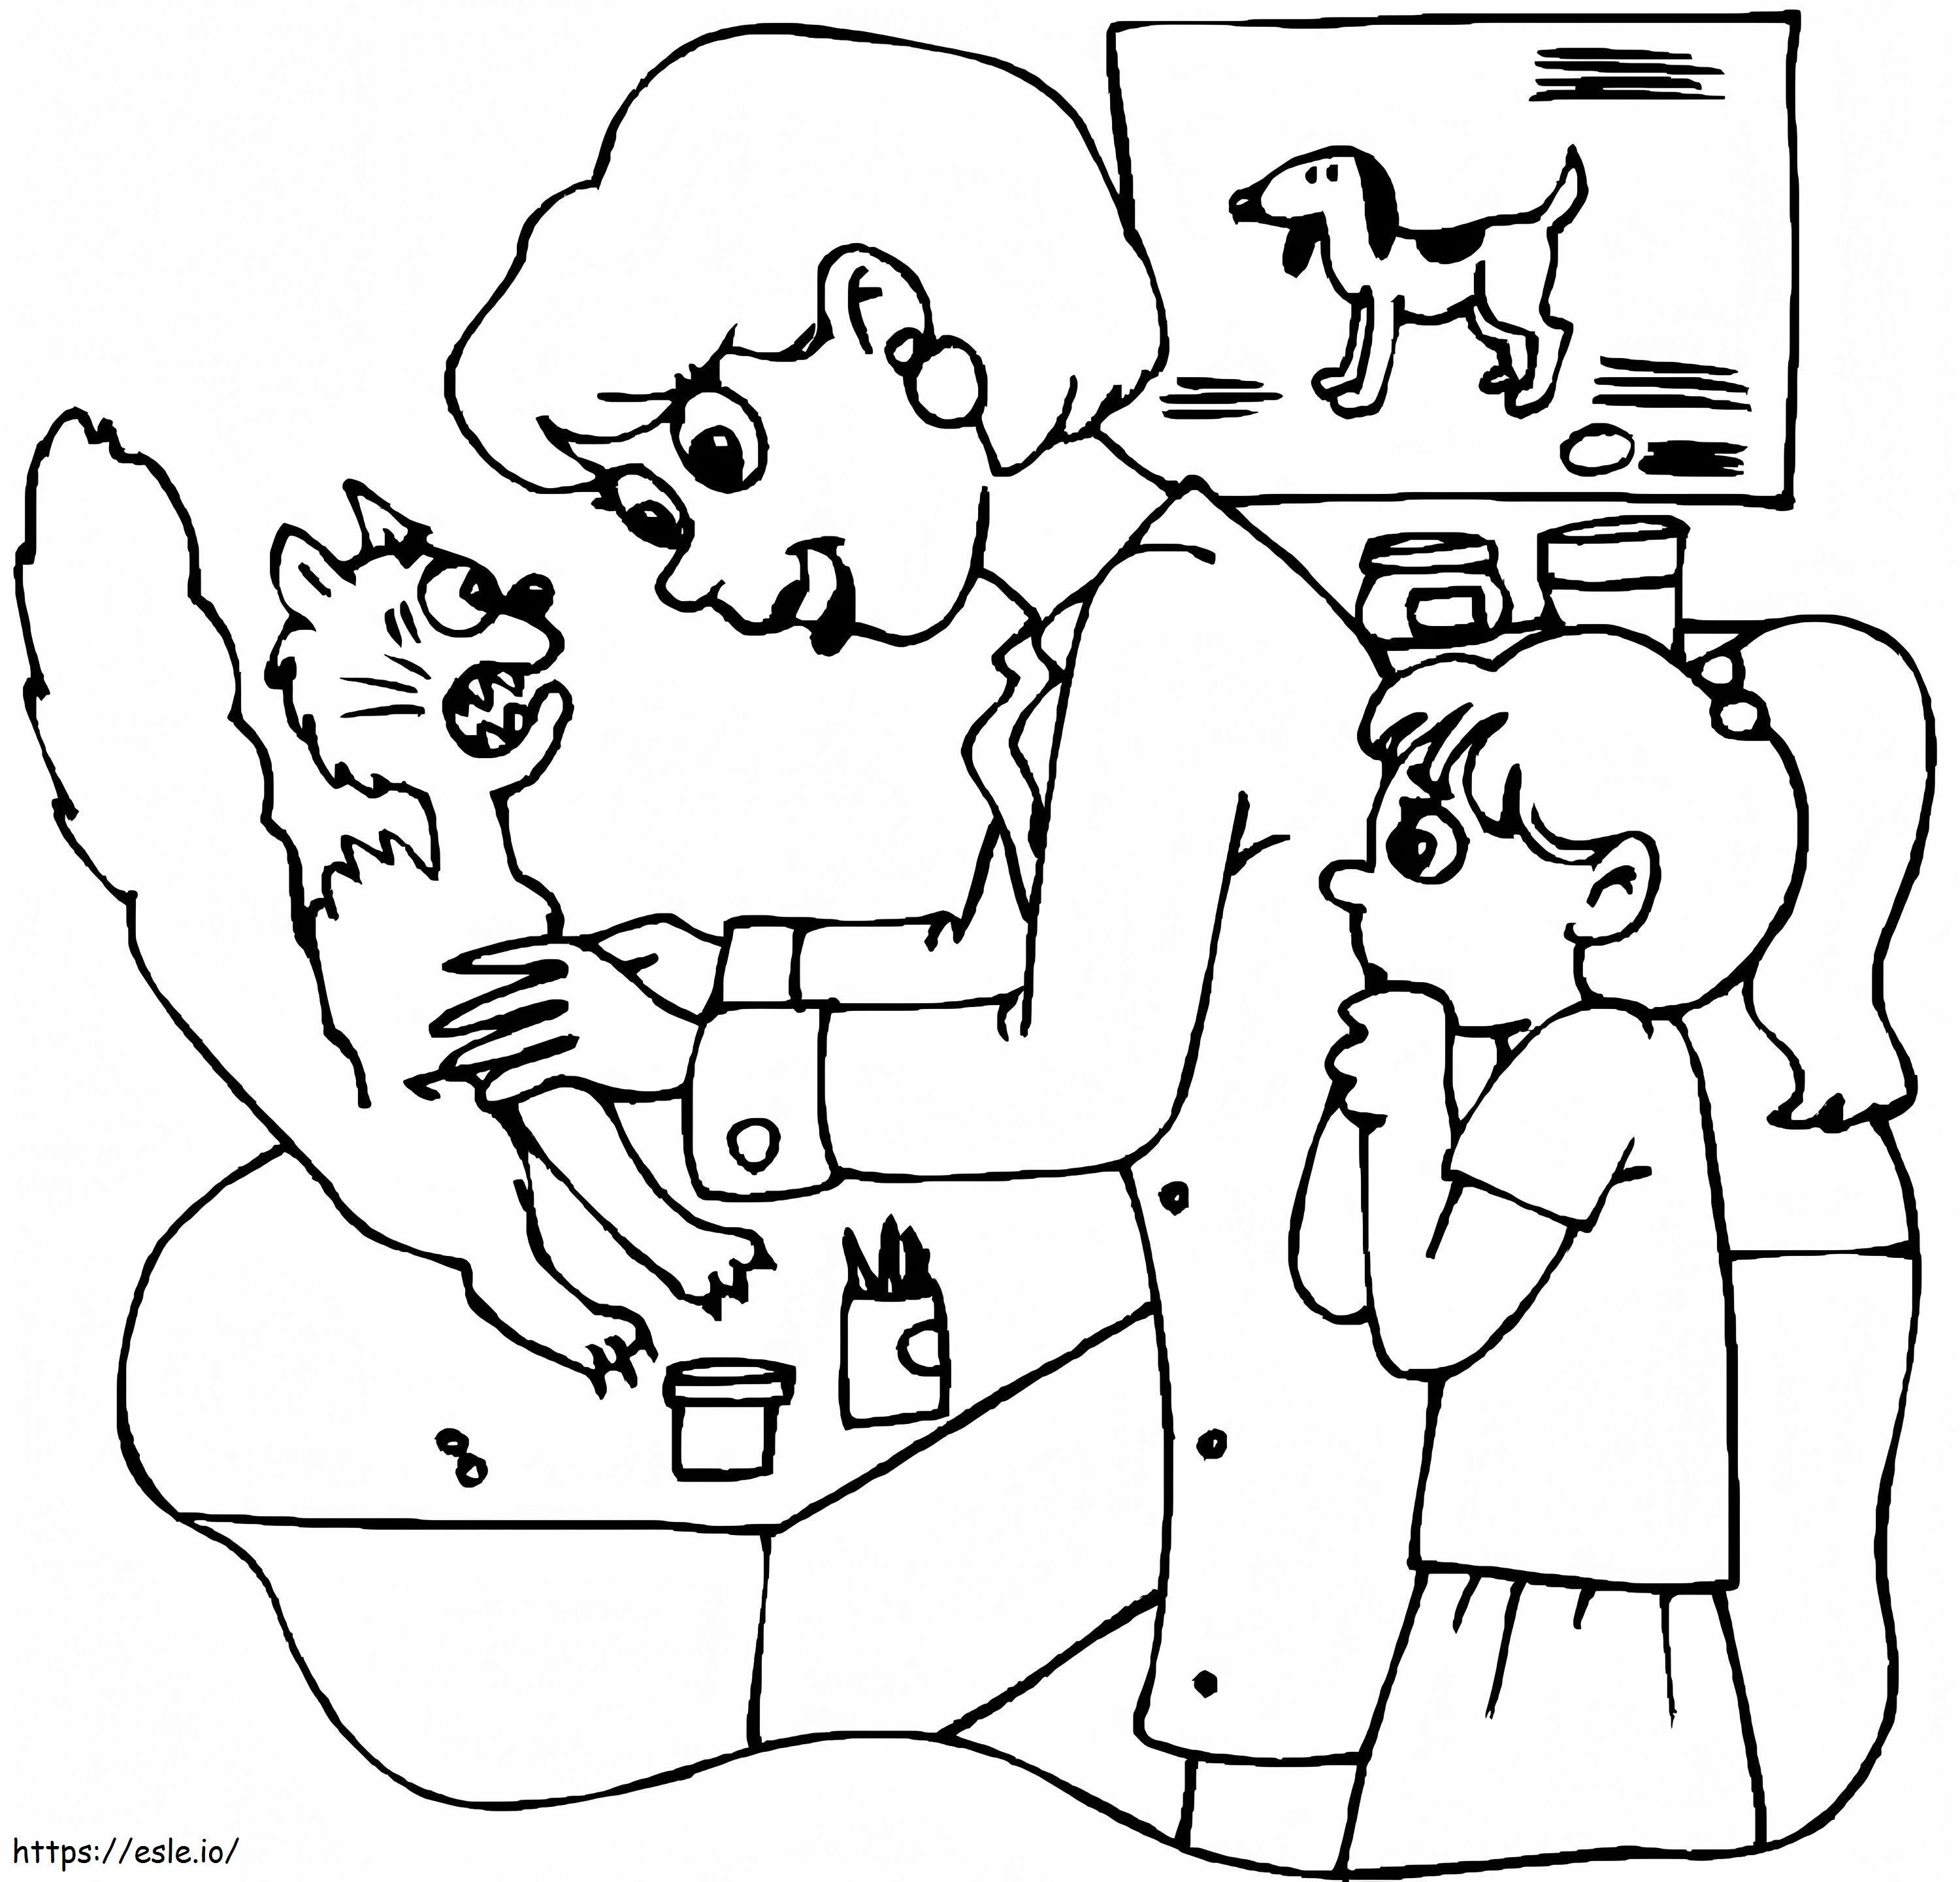 Veterinarian And Scared Cat coloring page